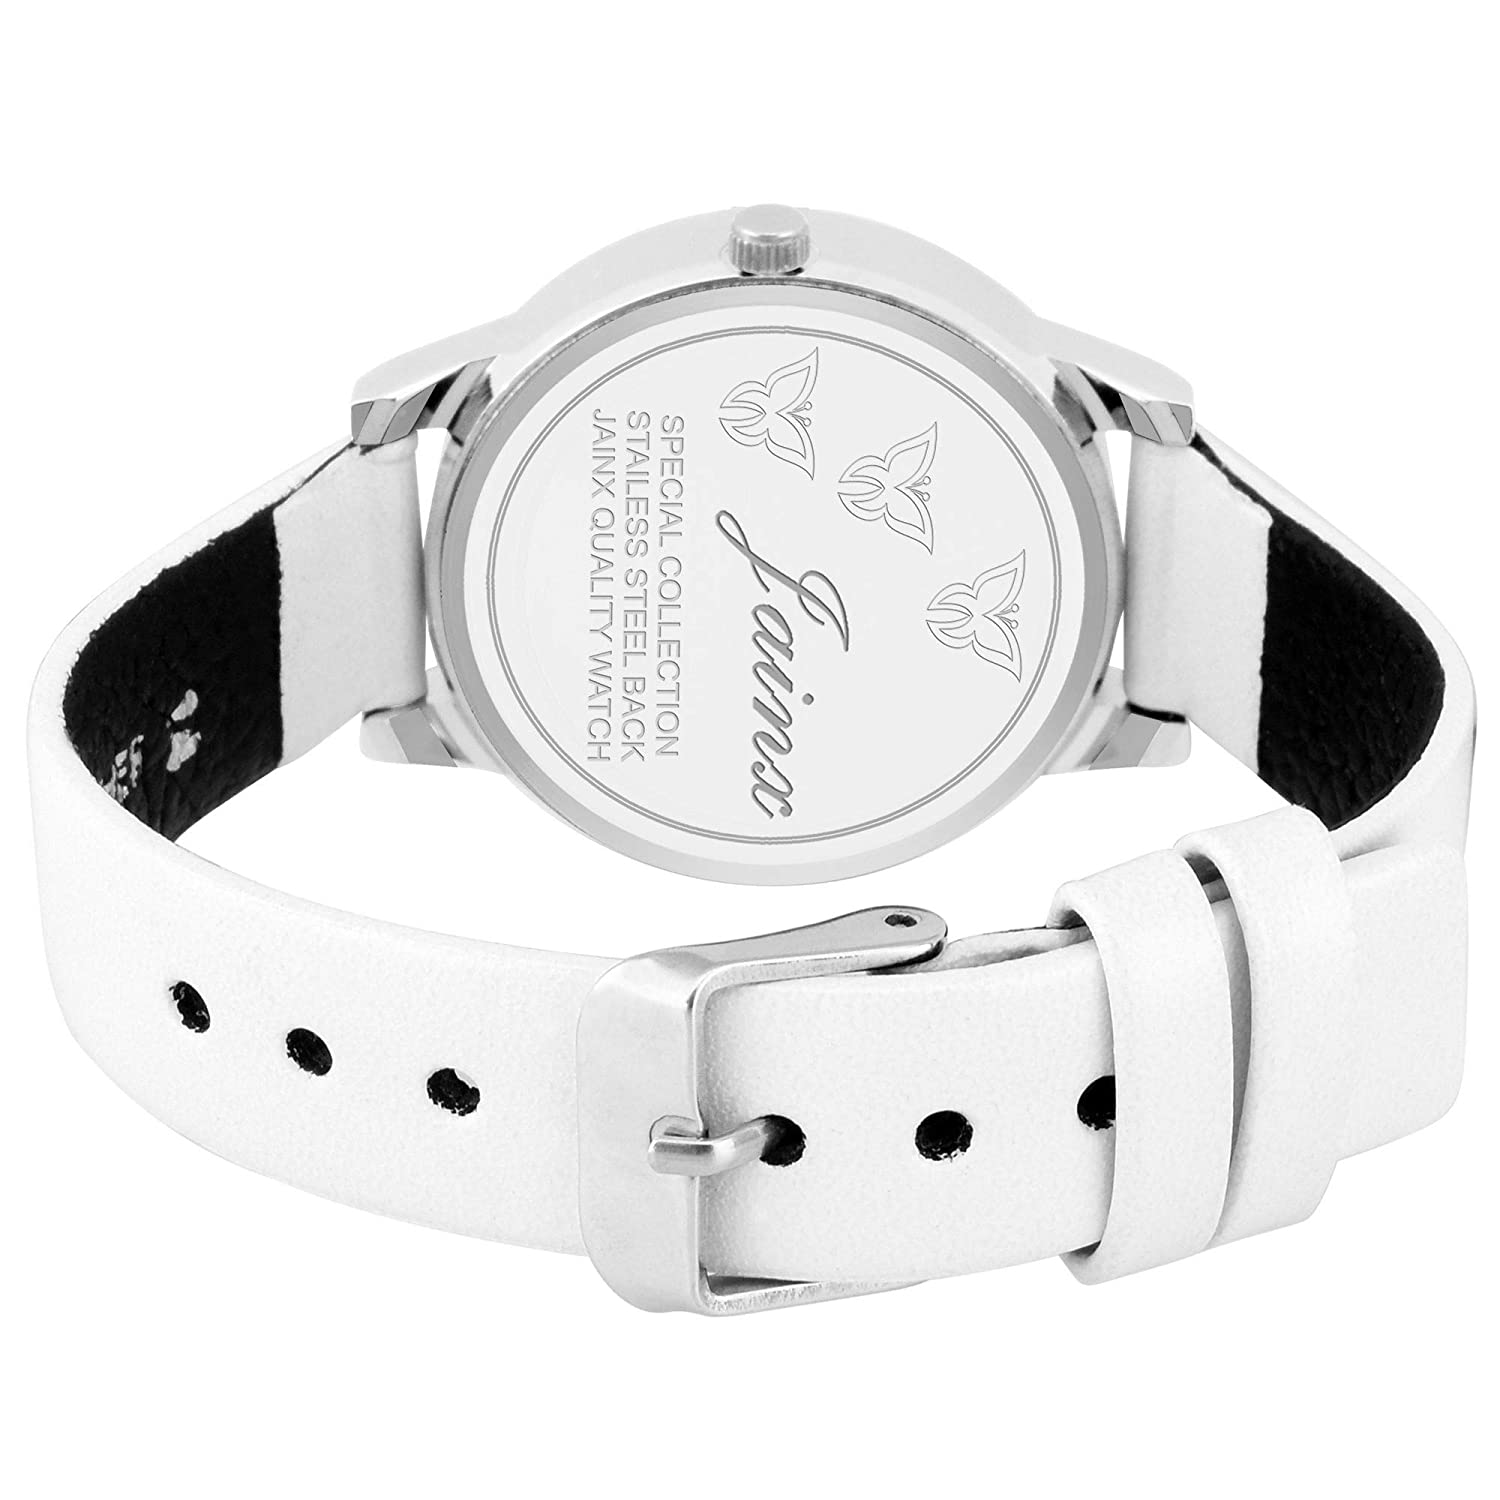 Silver Day & Date Function Genuine Leather Strap Analog Watch - For Women JW600 - Jainx Store